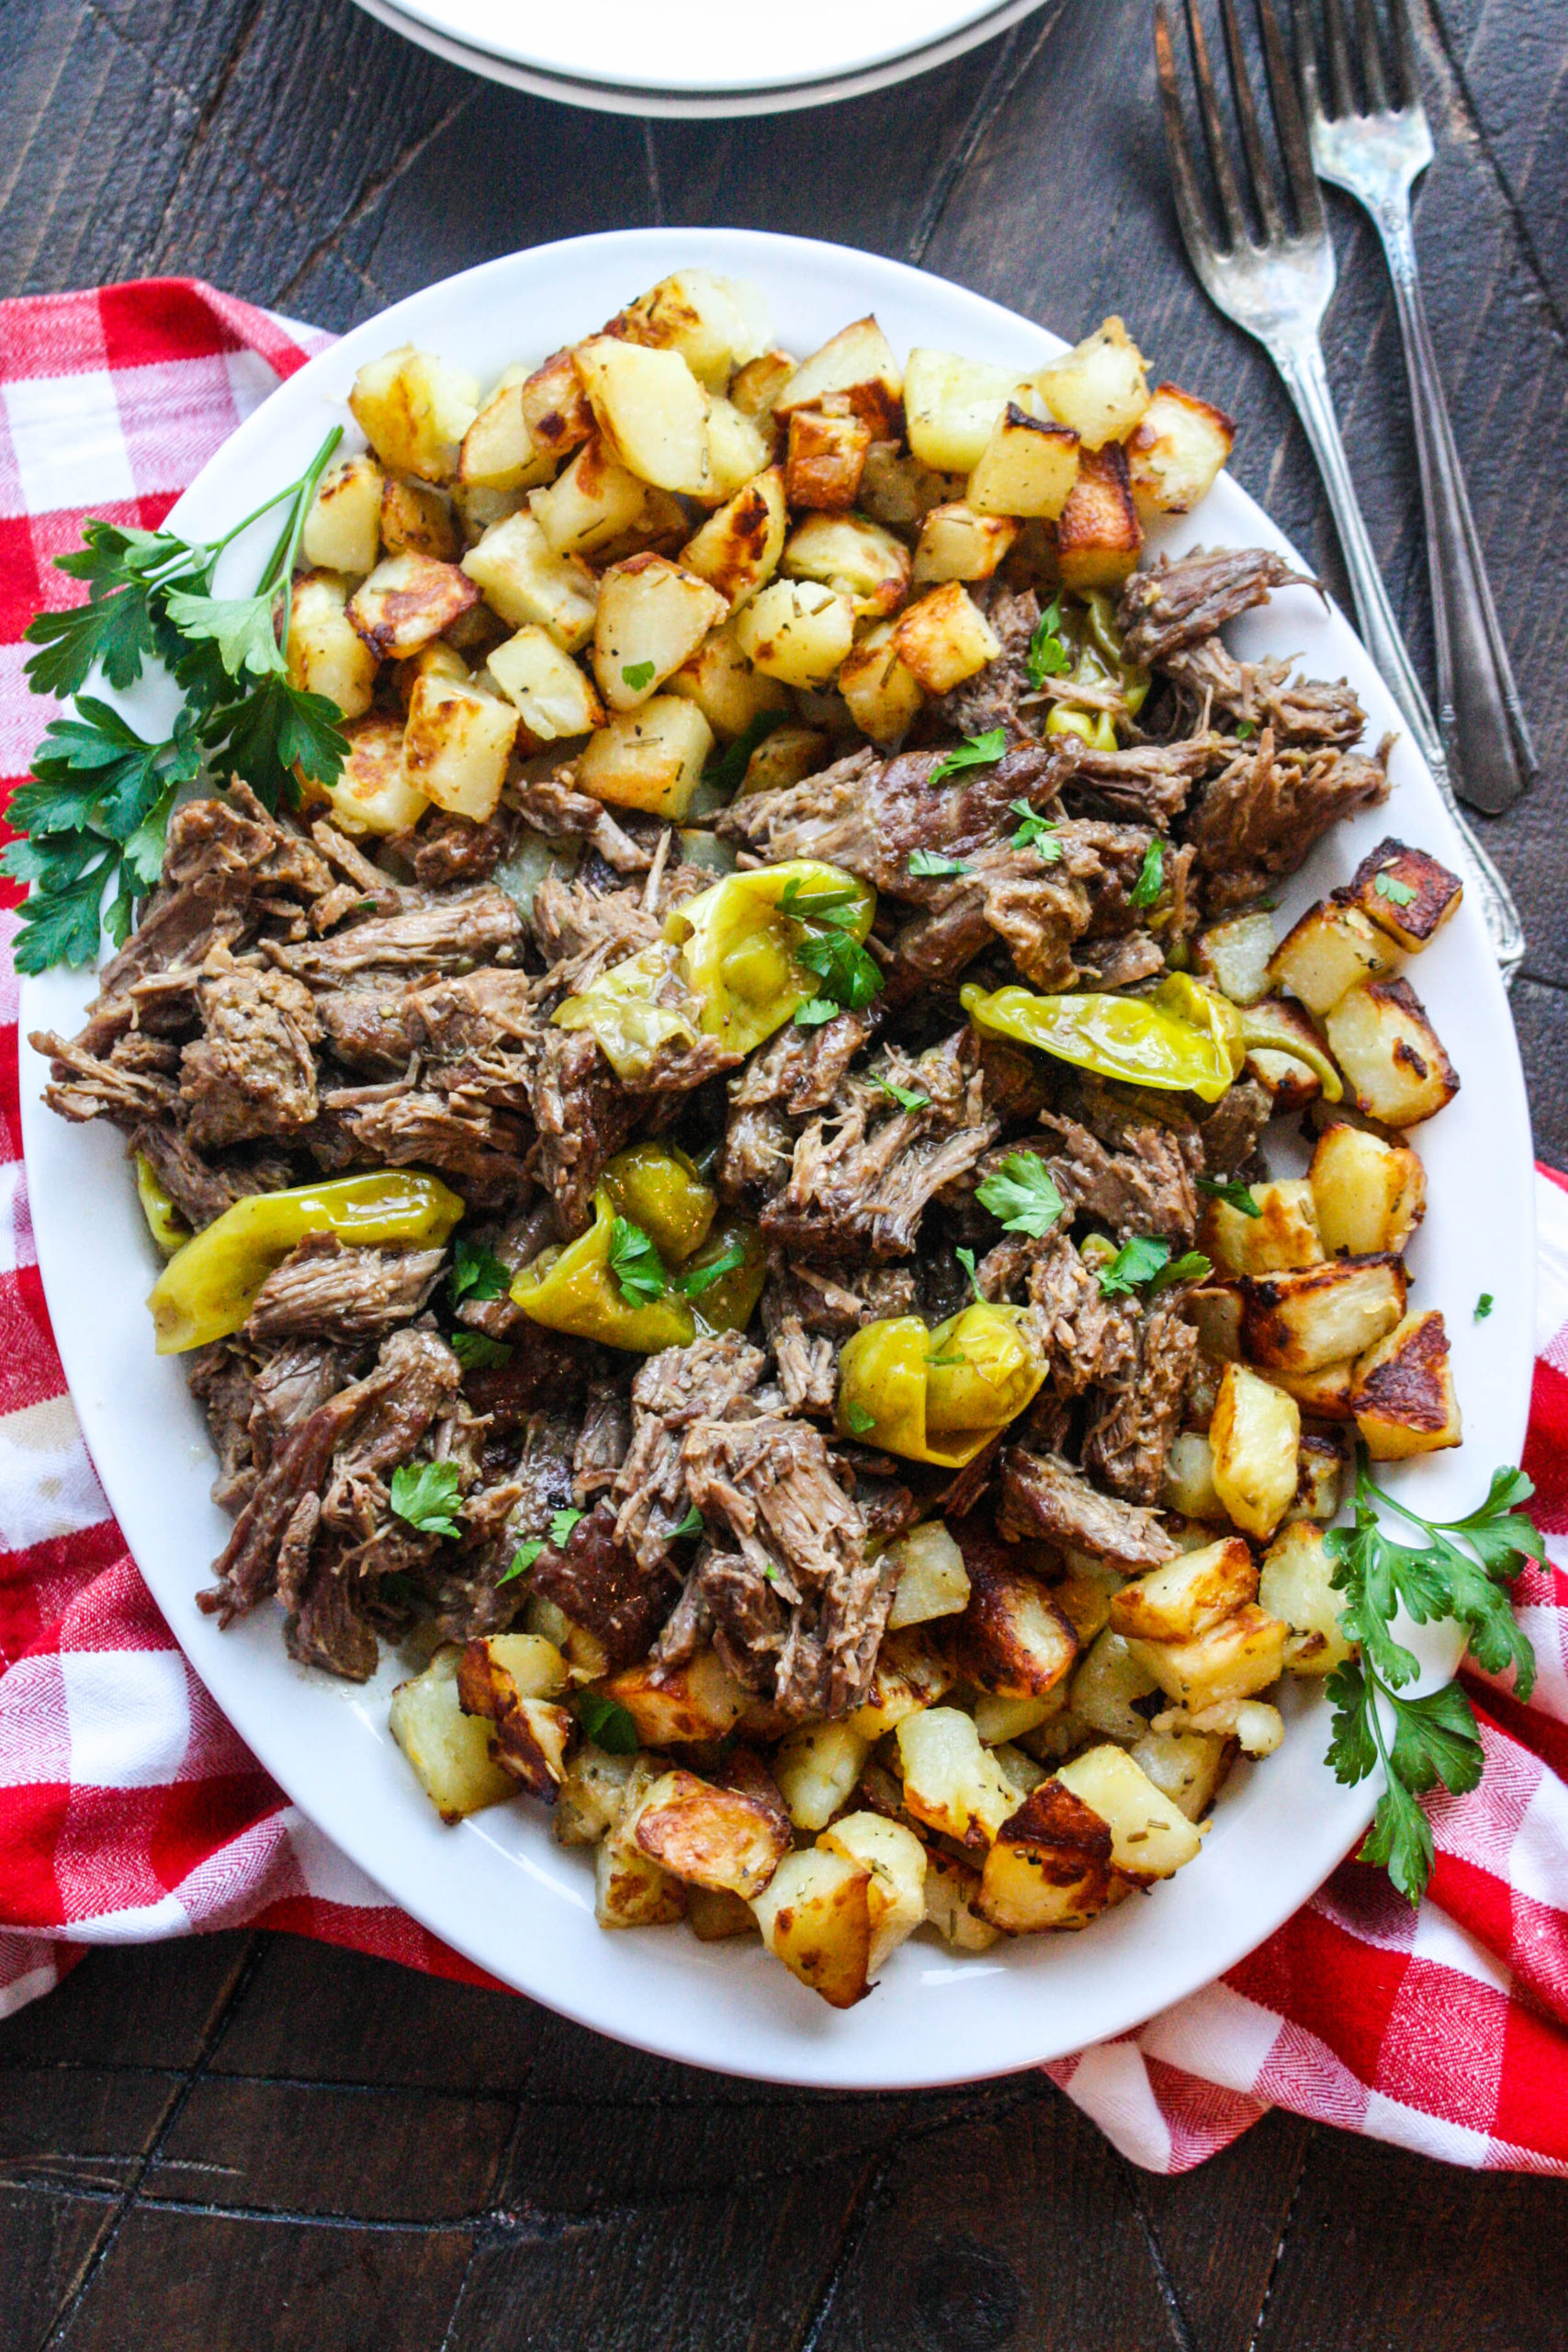 You'll love this Slow Cooker Mississippi Pot Roast for all its wonderful flavors!